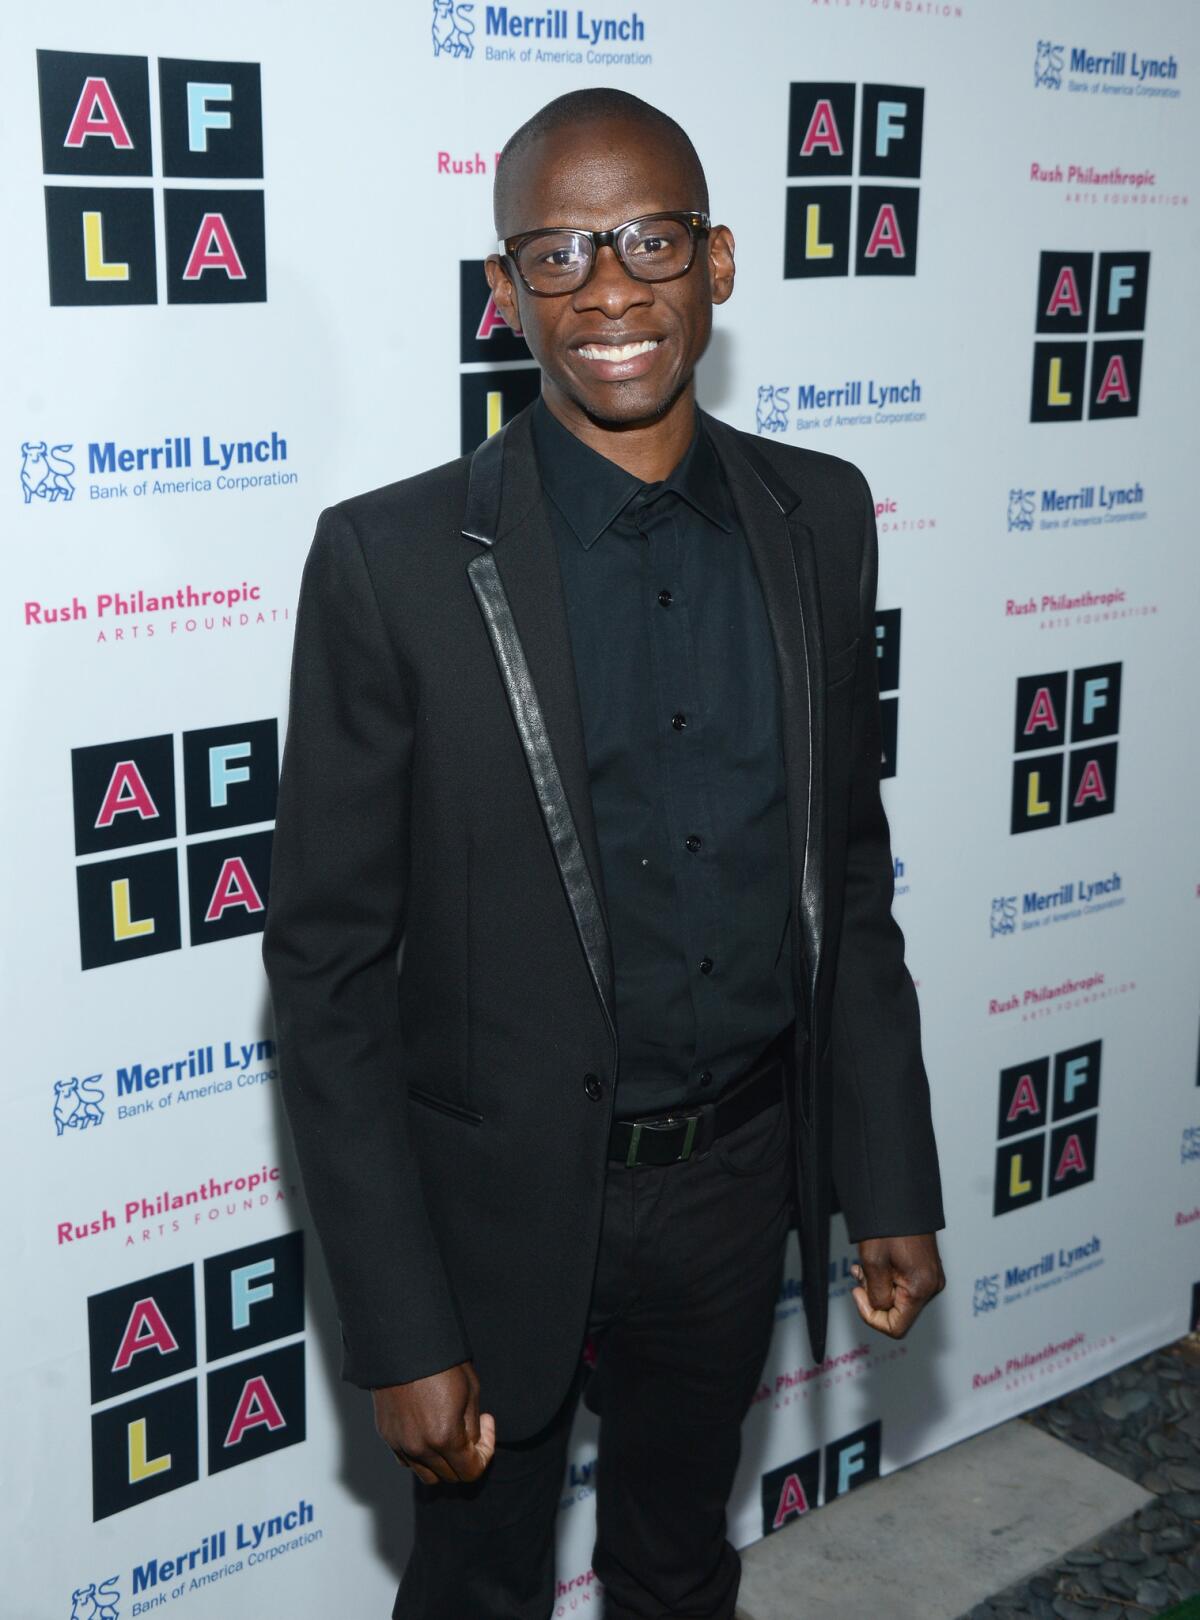 Troy Carter founded Atom Factory, which represents singers such as Meghan Trainor and Charlie Puth. (Matt Winkelmeyer / Getty Images for The Rush Philanthropic Art Foundation)